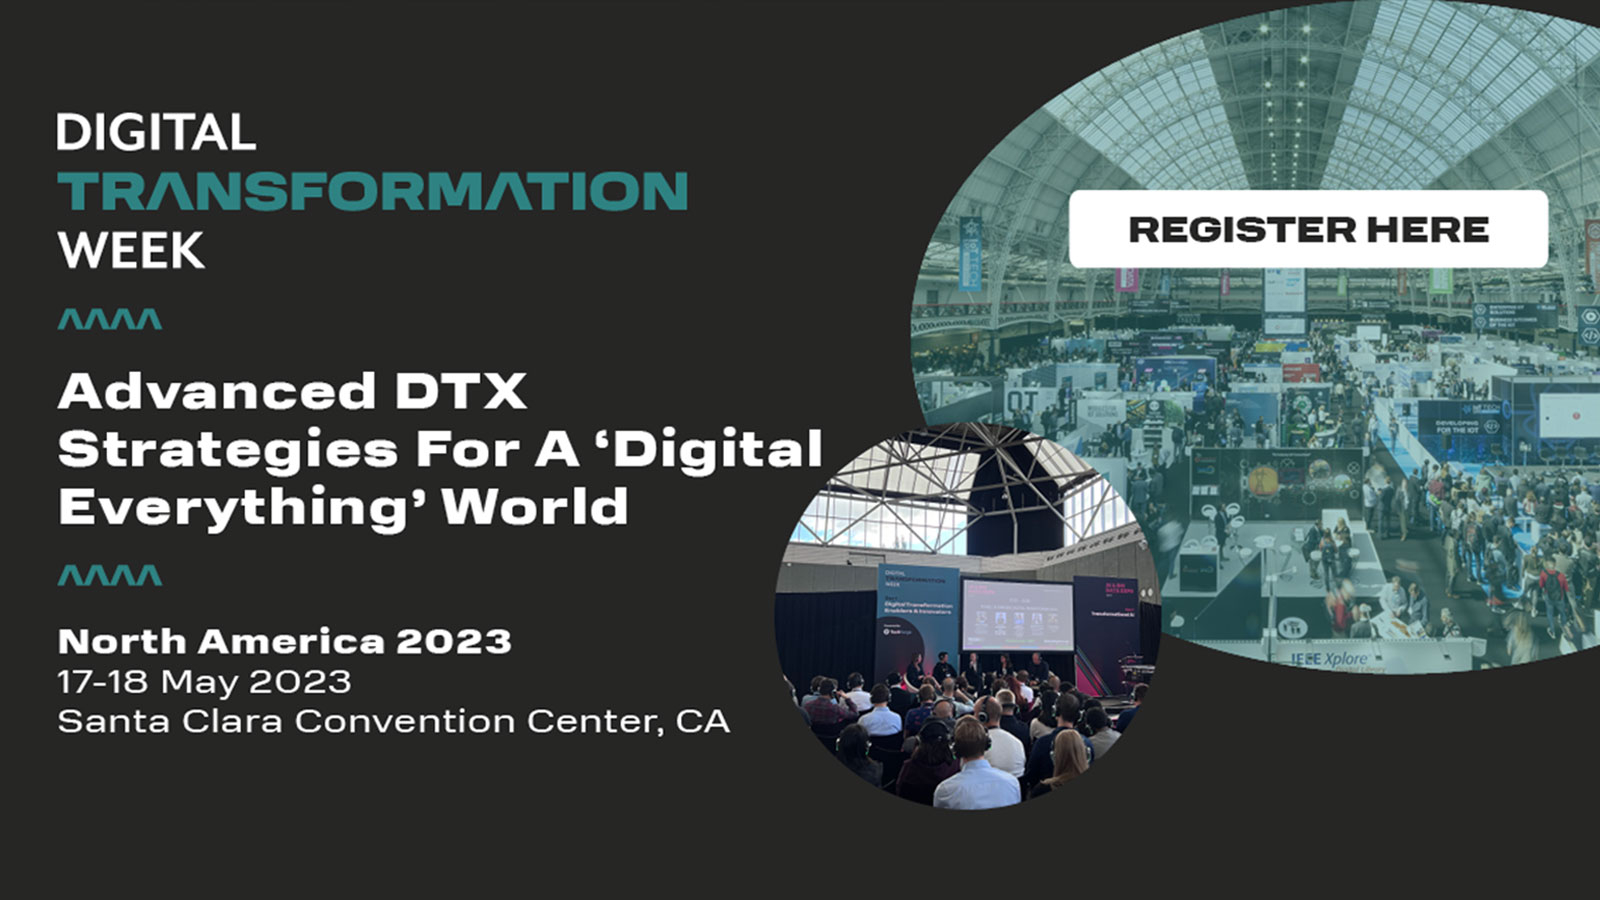 Top Technology Executives Set to Take the Stage at Digital Transformation Week North America